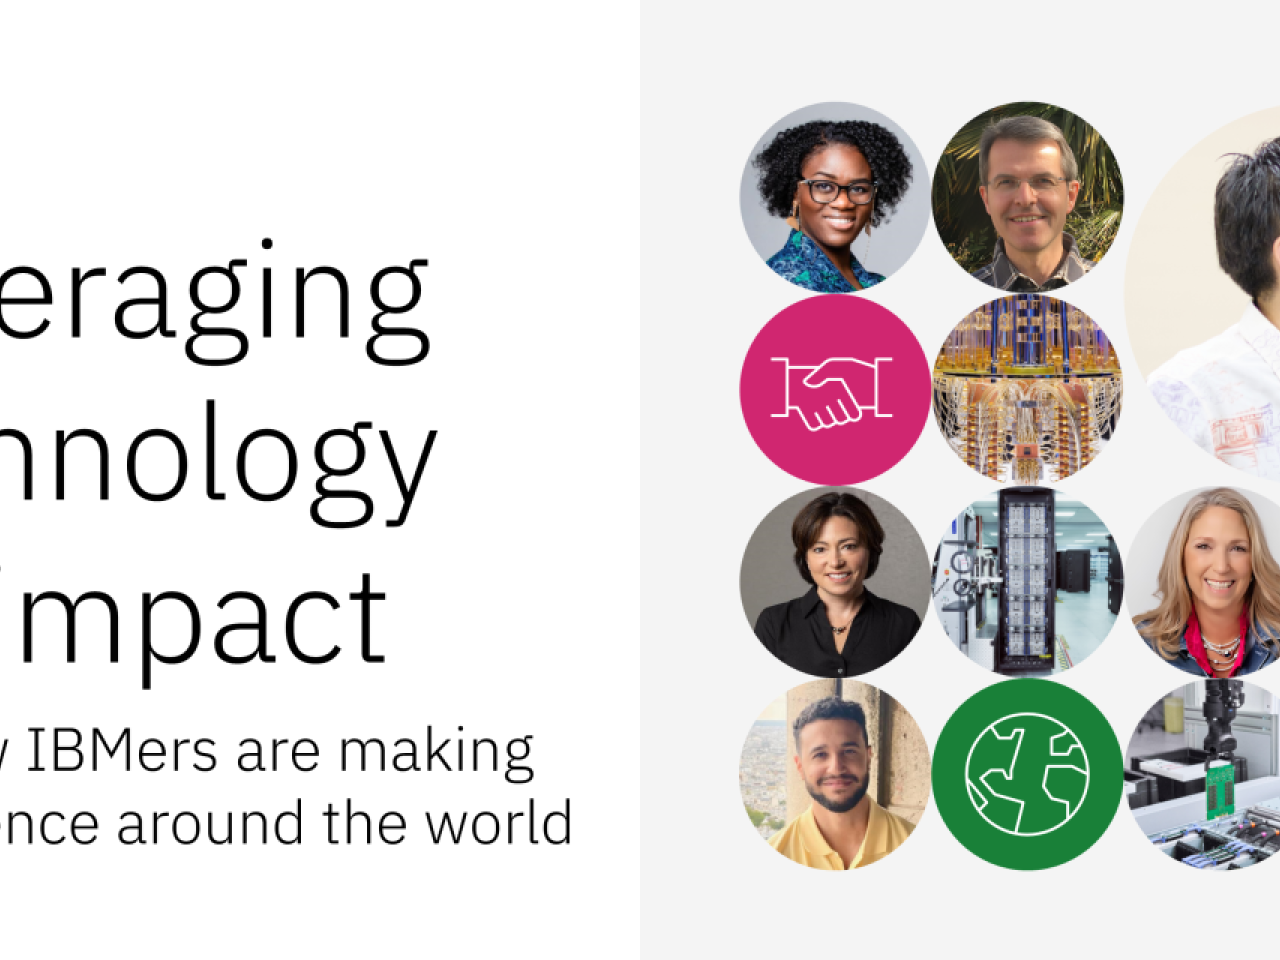 "Leveraging technology for Impact: See how IBMers are making a difference around the world"